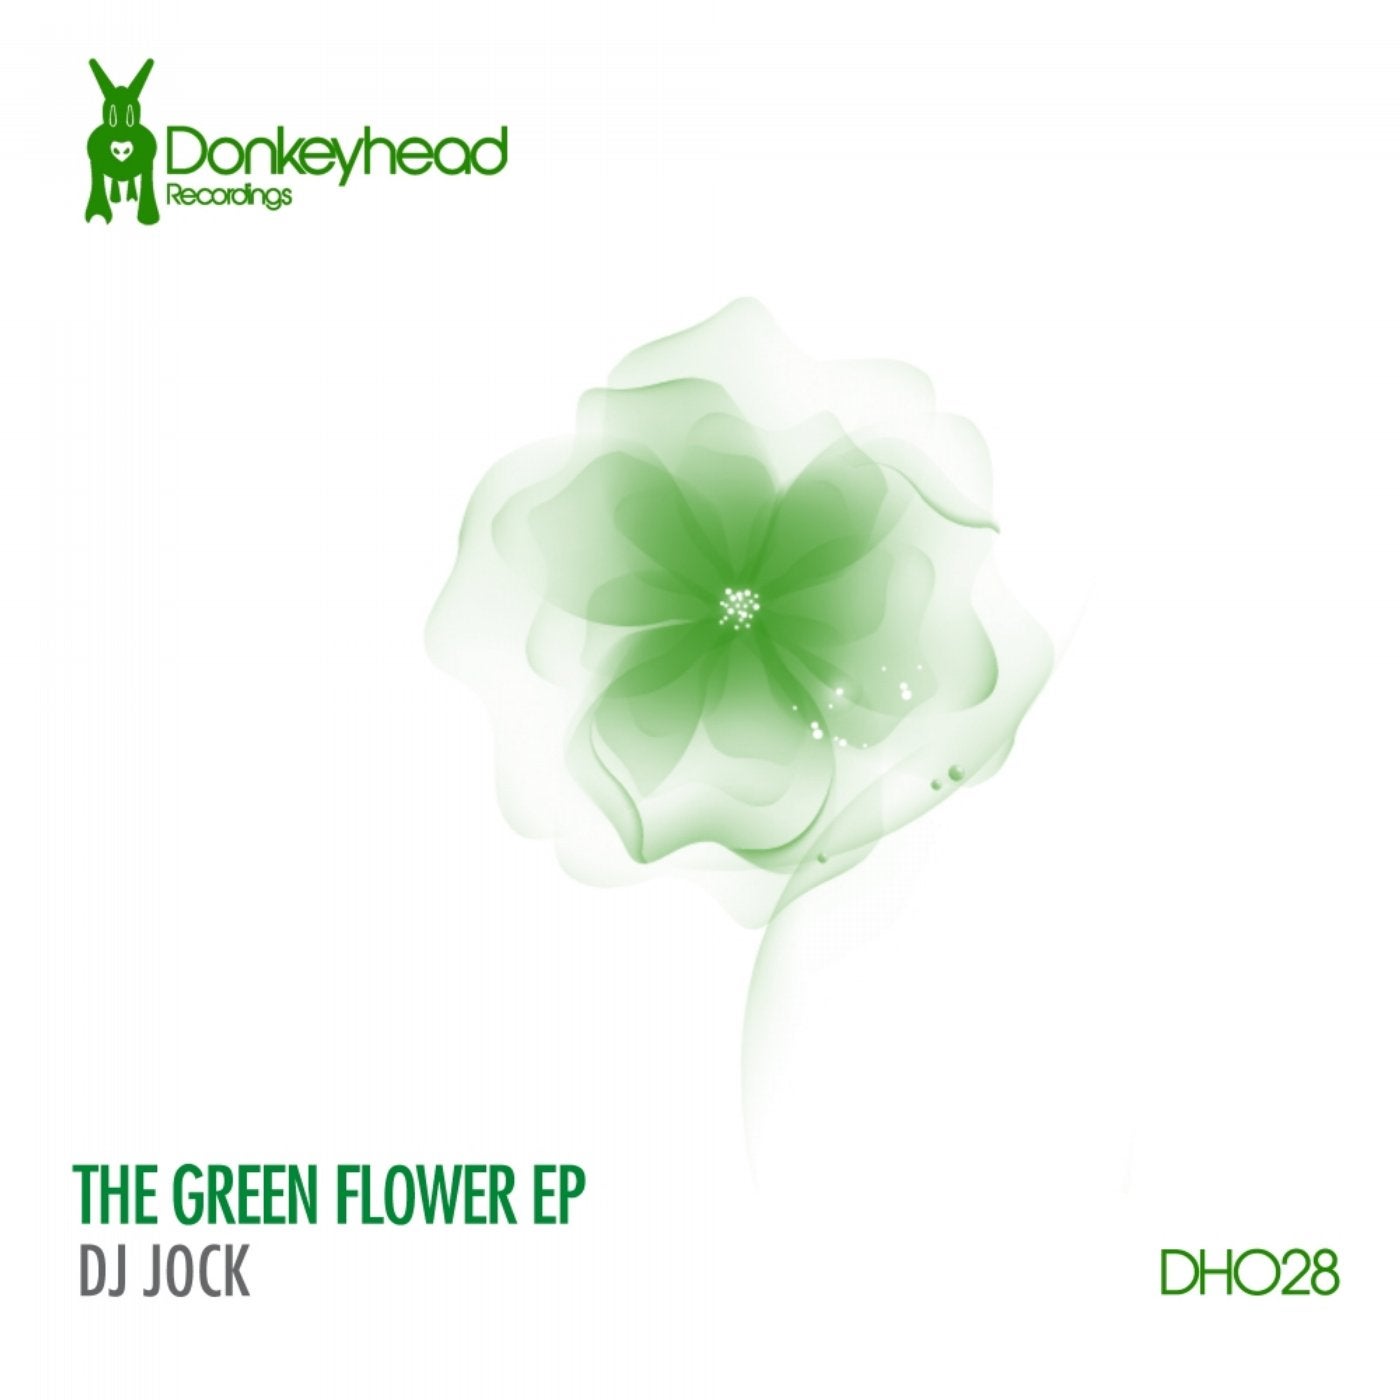 The Green Flower EP